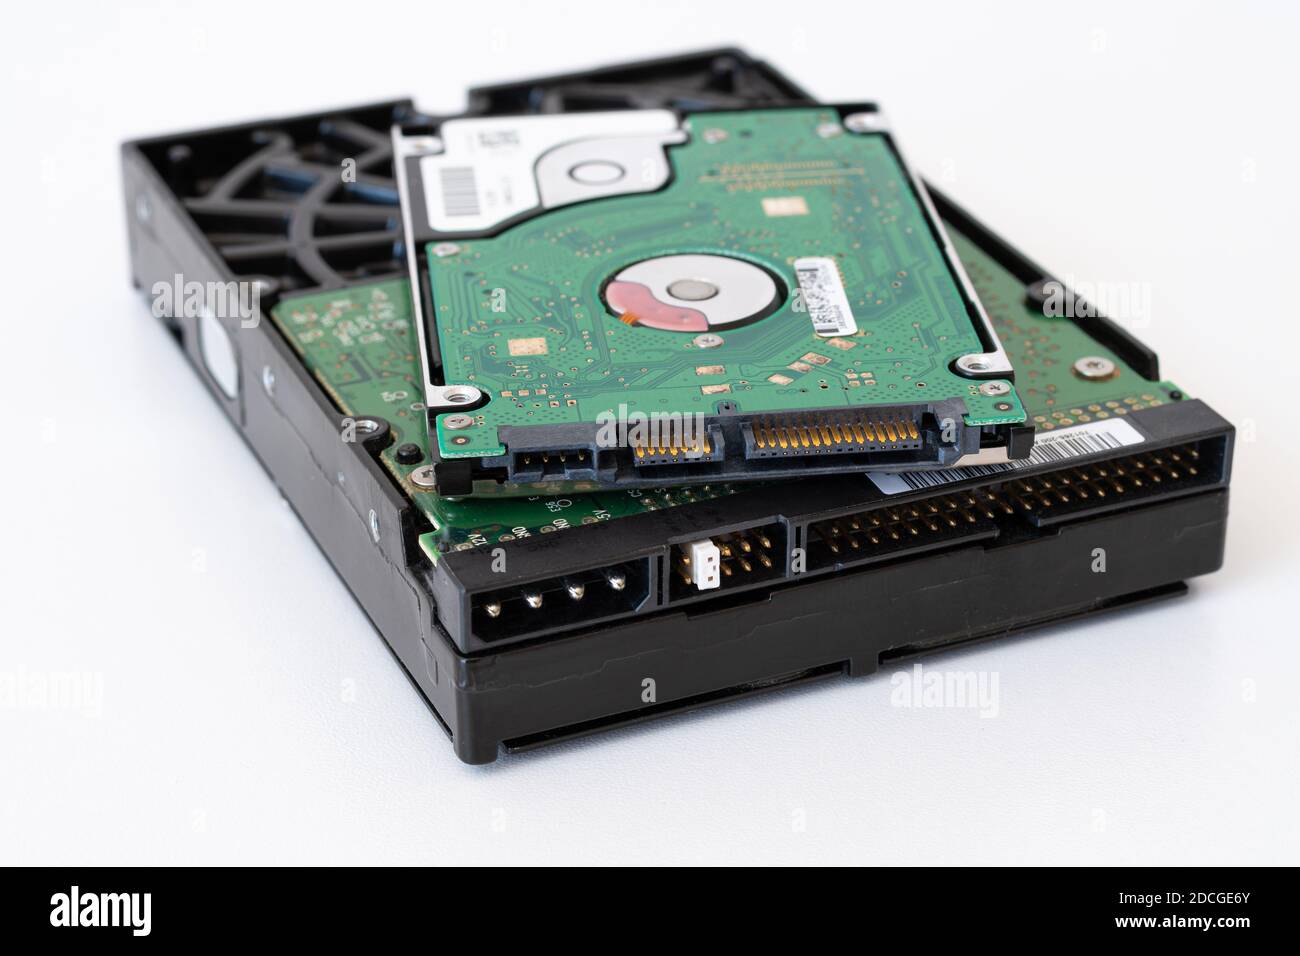 Size Comparison Of Hdd 3 5 And 2 5 Hard Drives Sata And Ide Format Stock Photo Alamy